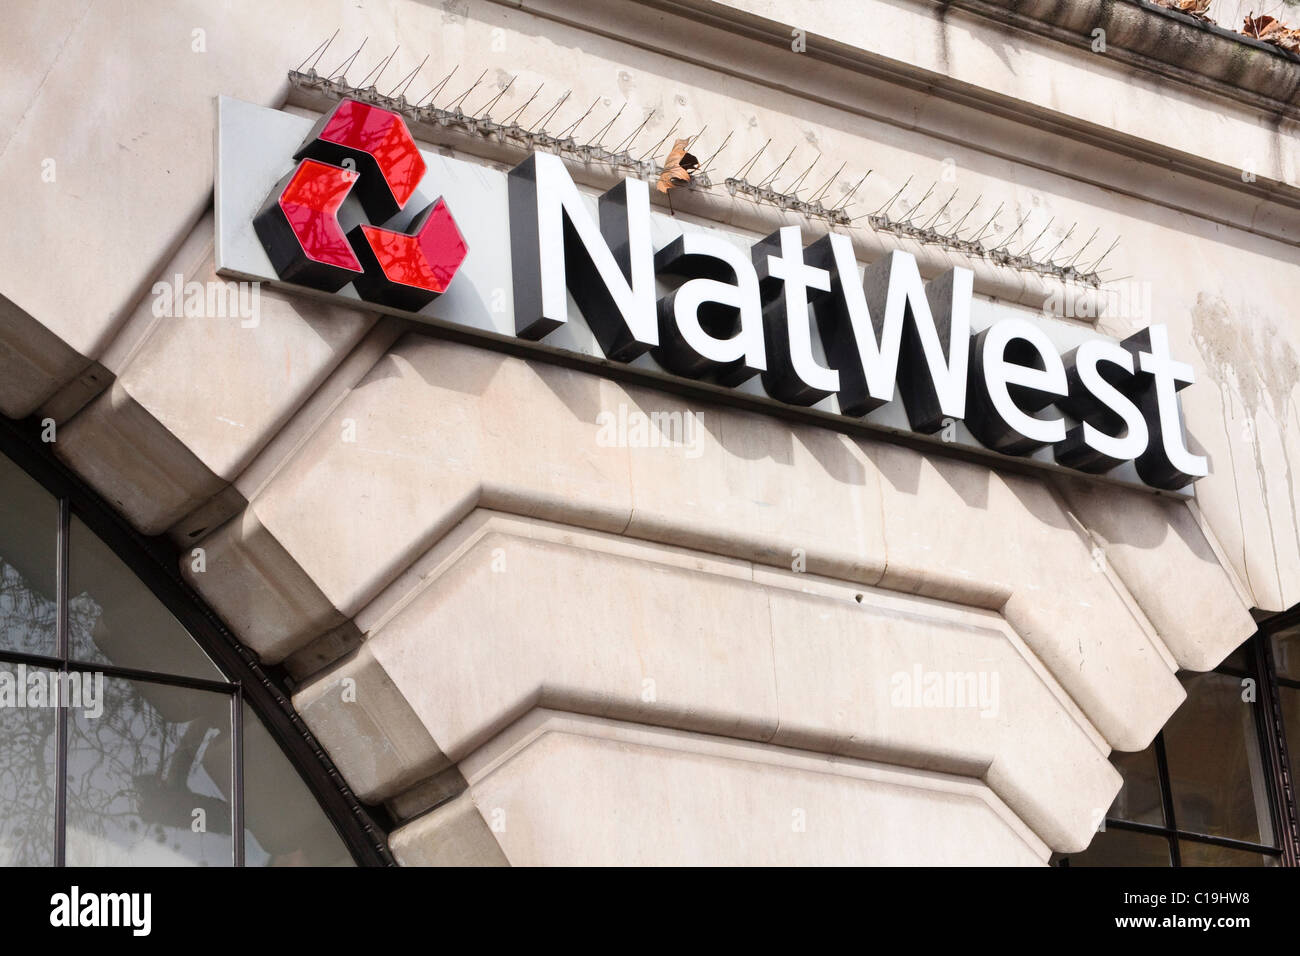 An image showing Natwest bank shop sign Stock Photo